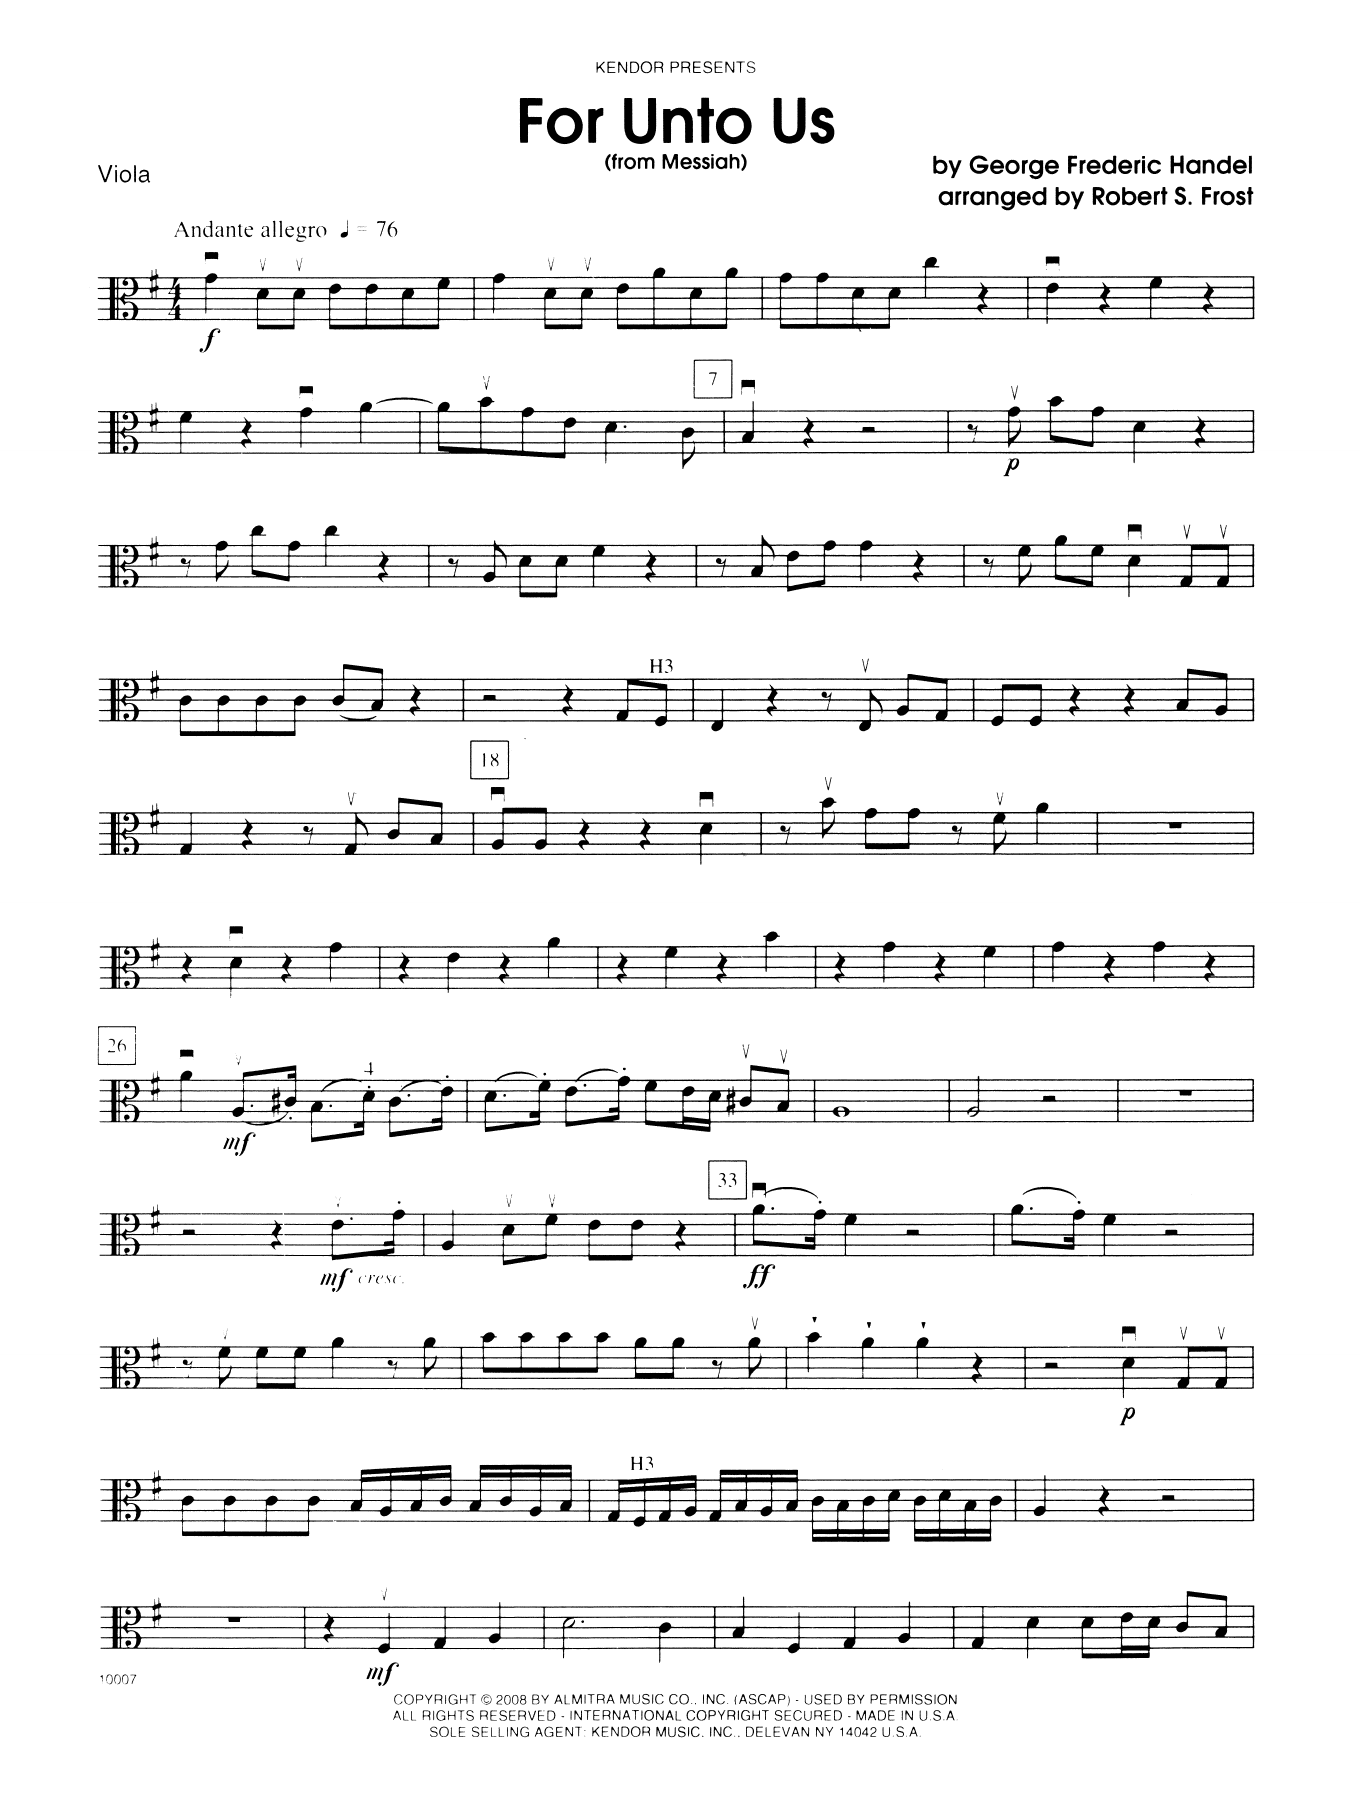 Download George Frideric Handel For Unto Us (from Messiah) - Viola Sheet Music